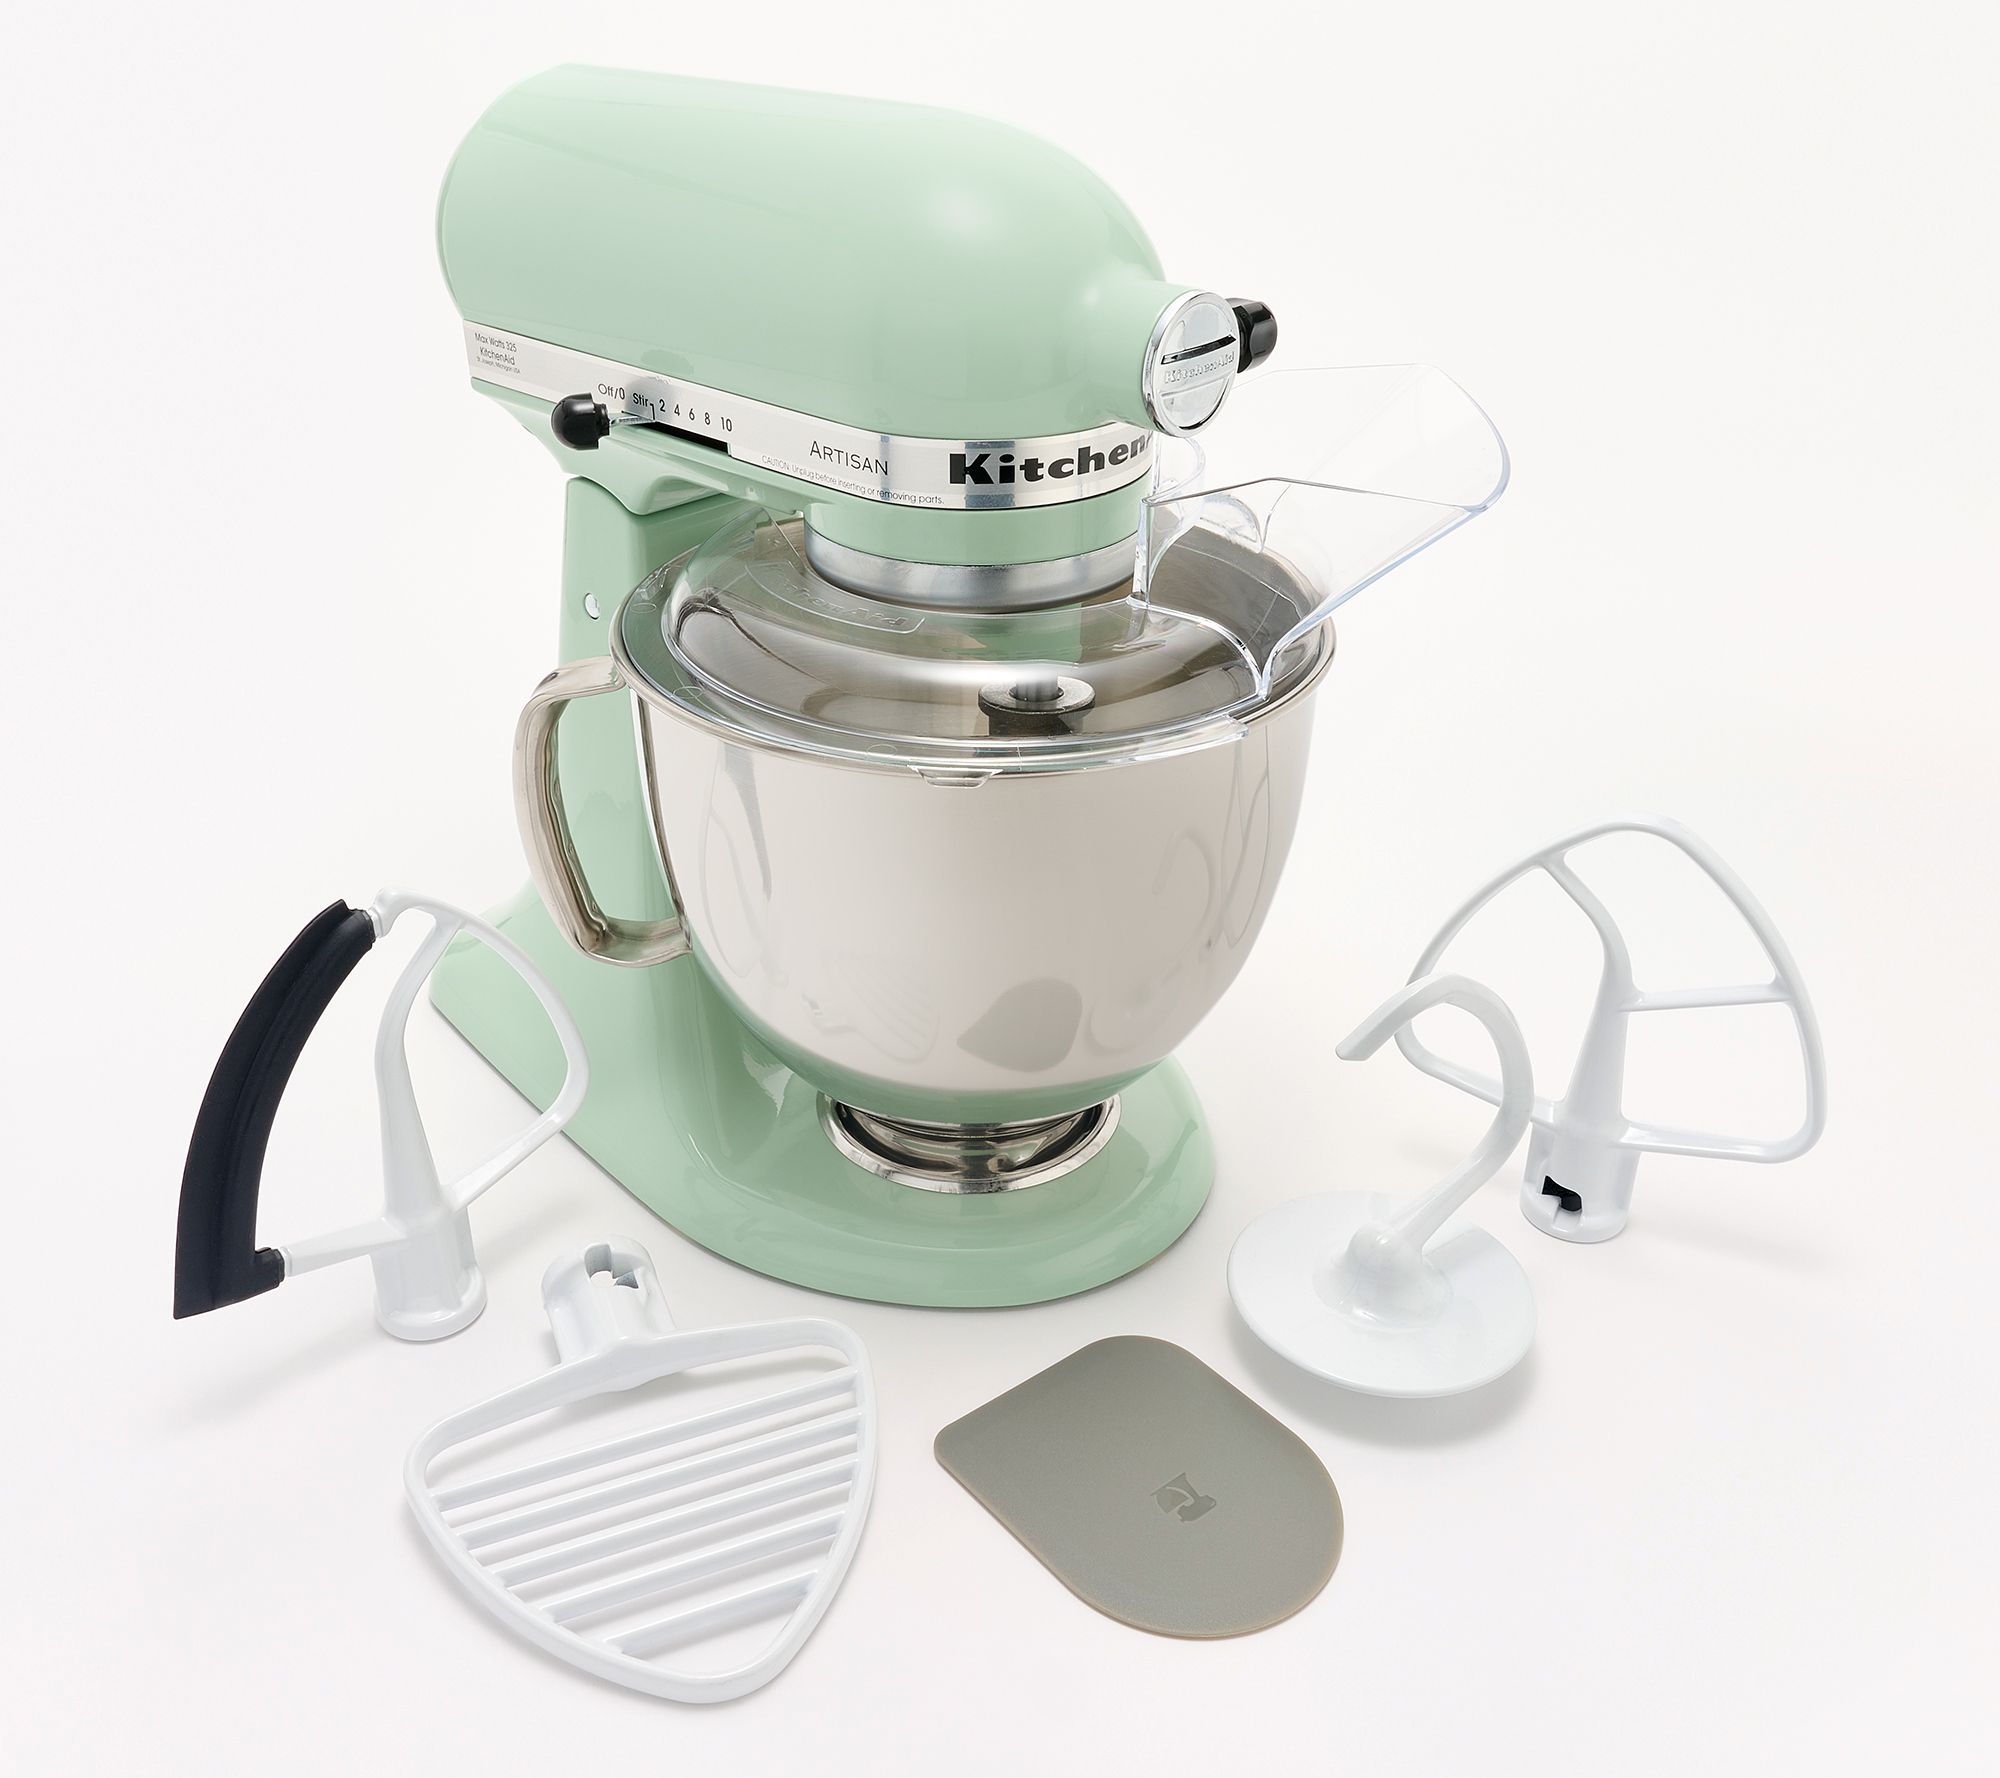 Whisk Wiper® PRO for Stand Mixers - Take Stand Mixing to the Next Level